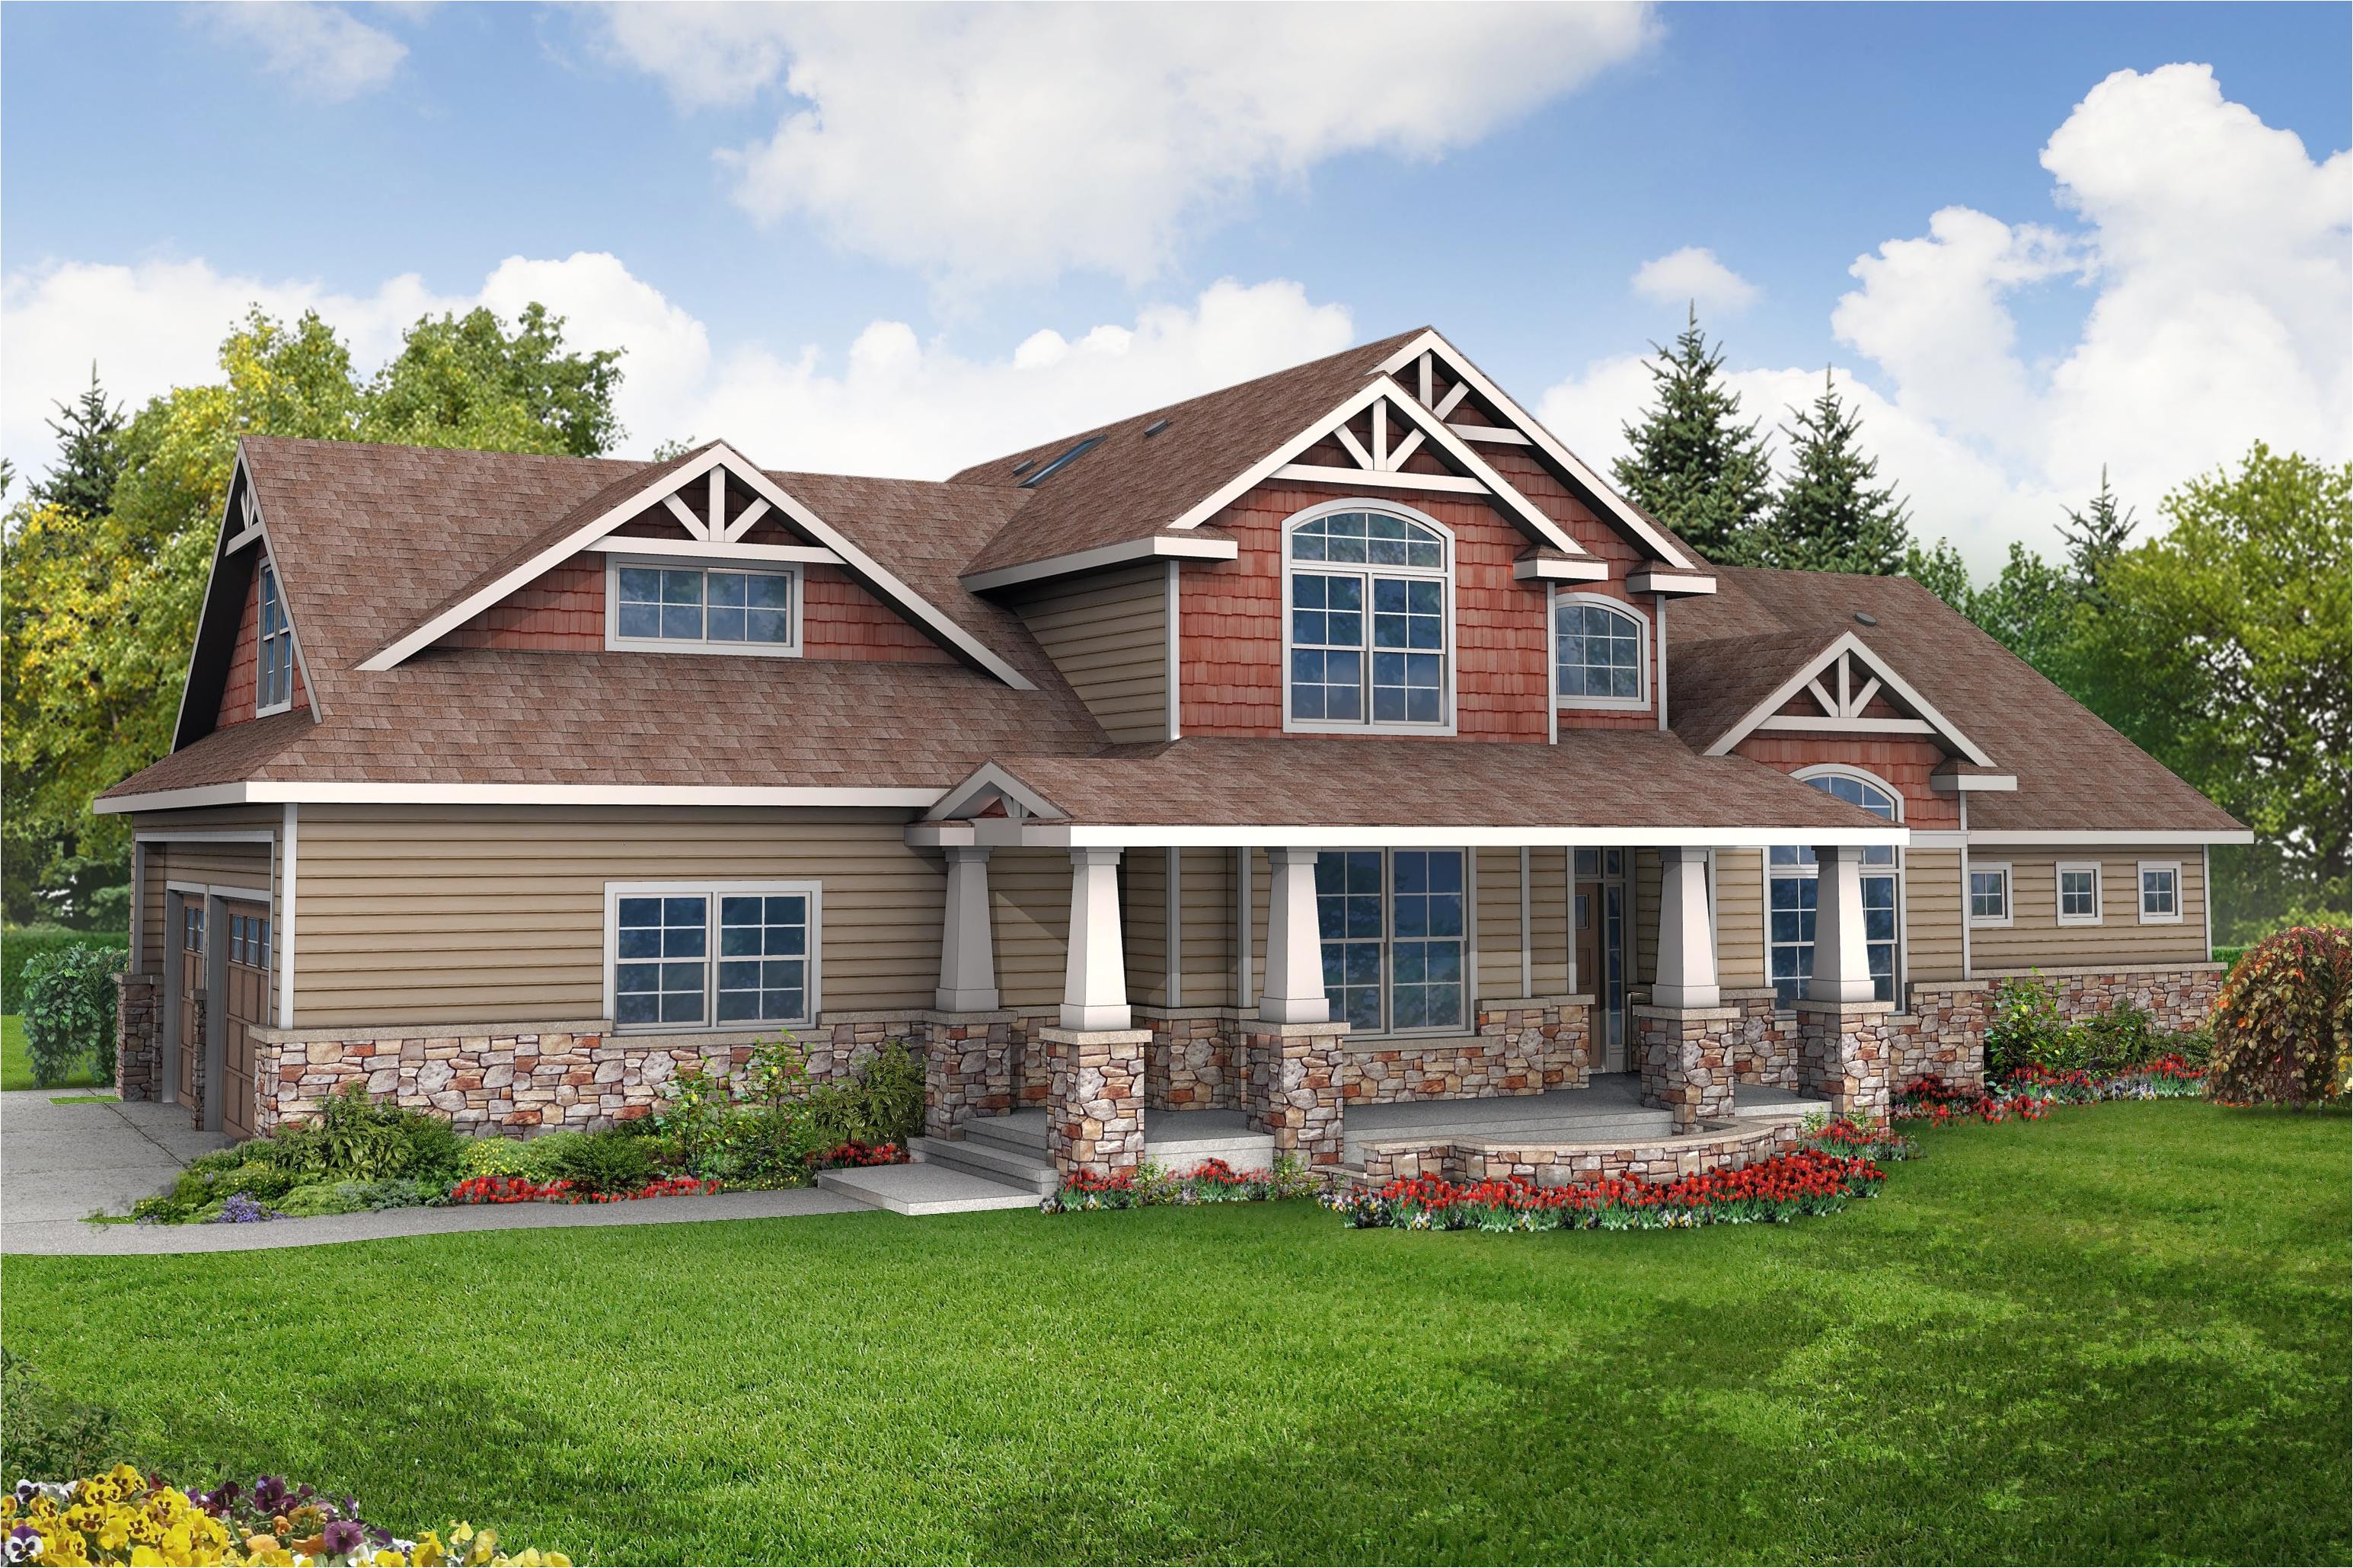 Craftsman Home Plans with Pictures Craftsman House Plans Tillamook 30 519 associated Designs